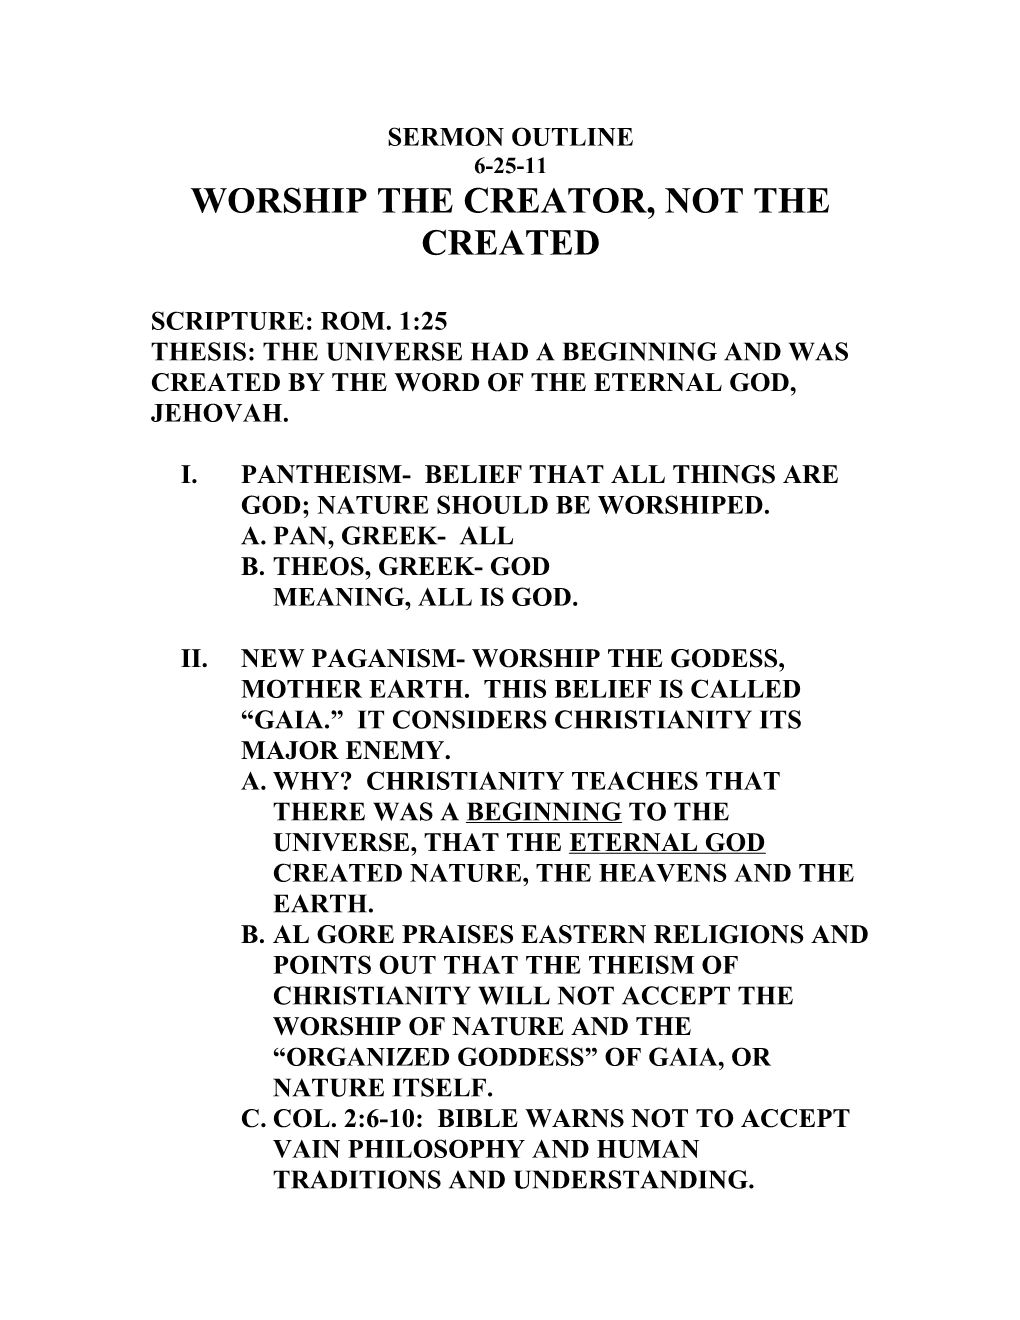 Worship the Creator, Not the Created